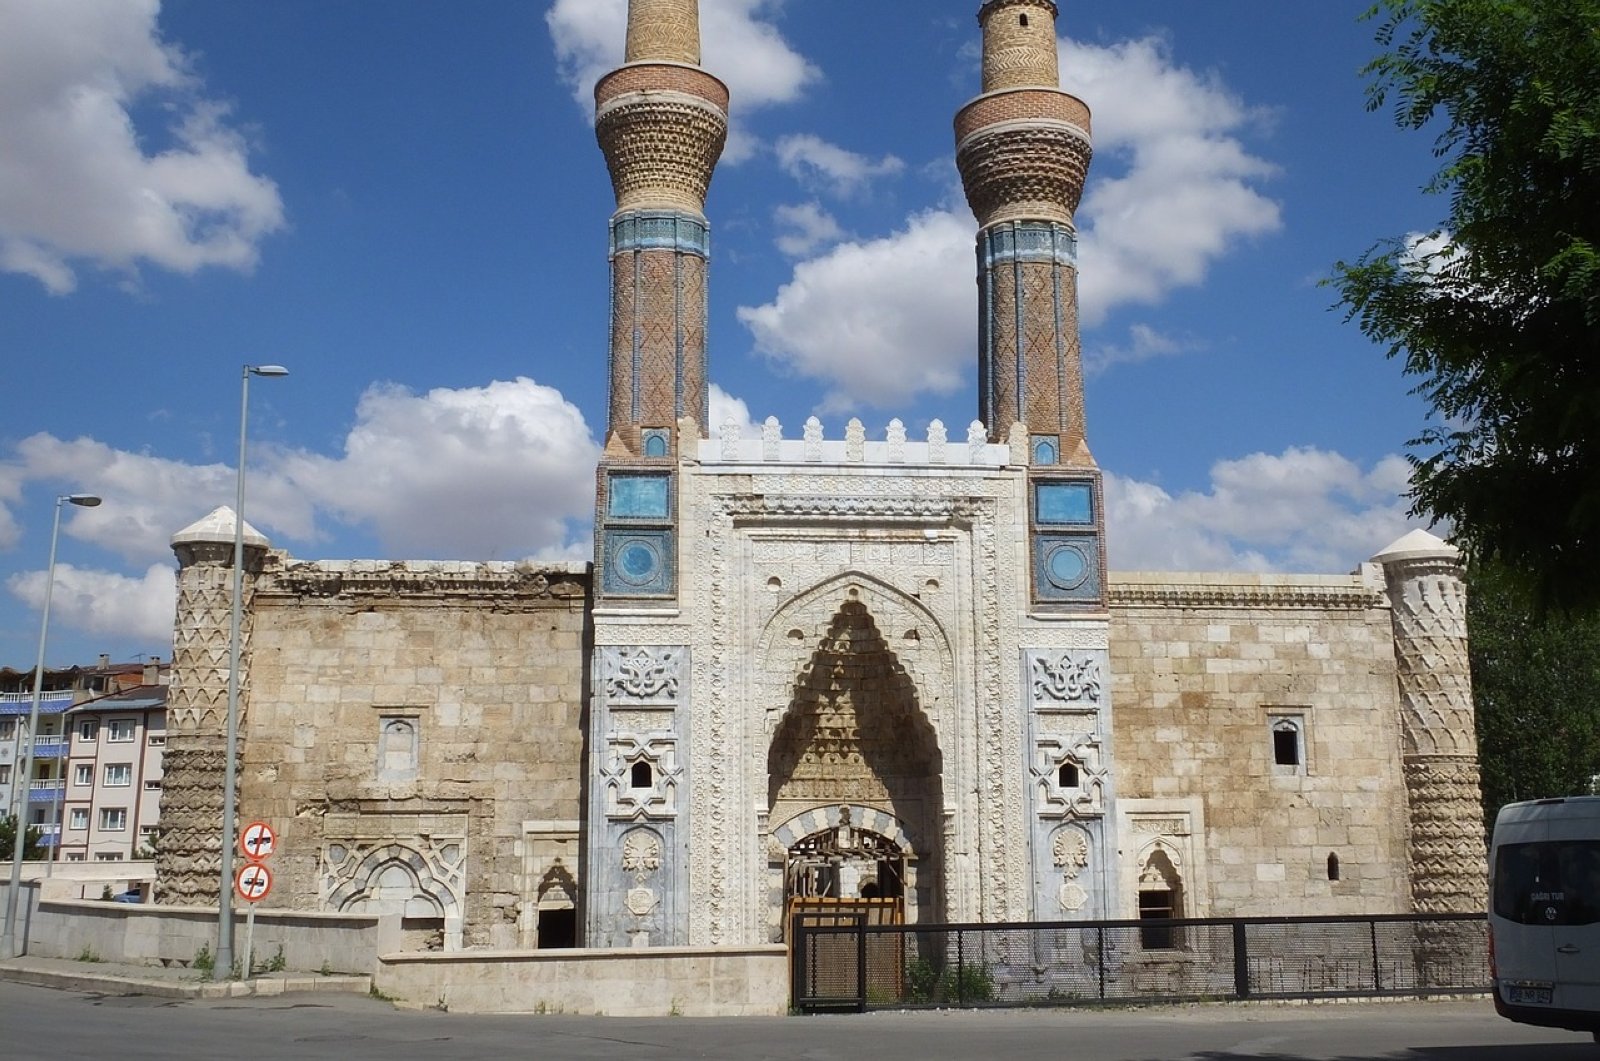 The Gök Medrese was built per the order of Vizier Sâhib Ata Fahreddin Ali in 1271 during the reign of Kaykhusraw III.